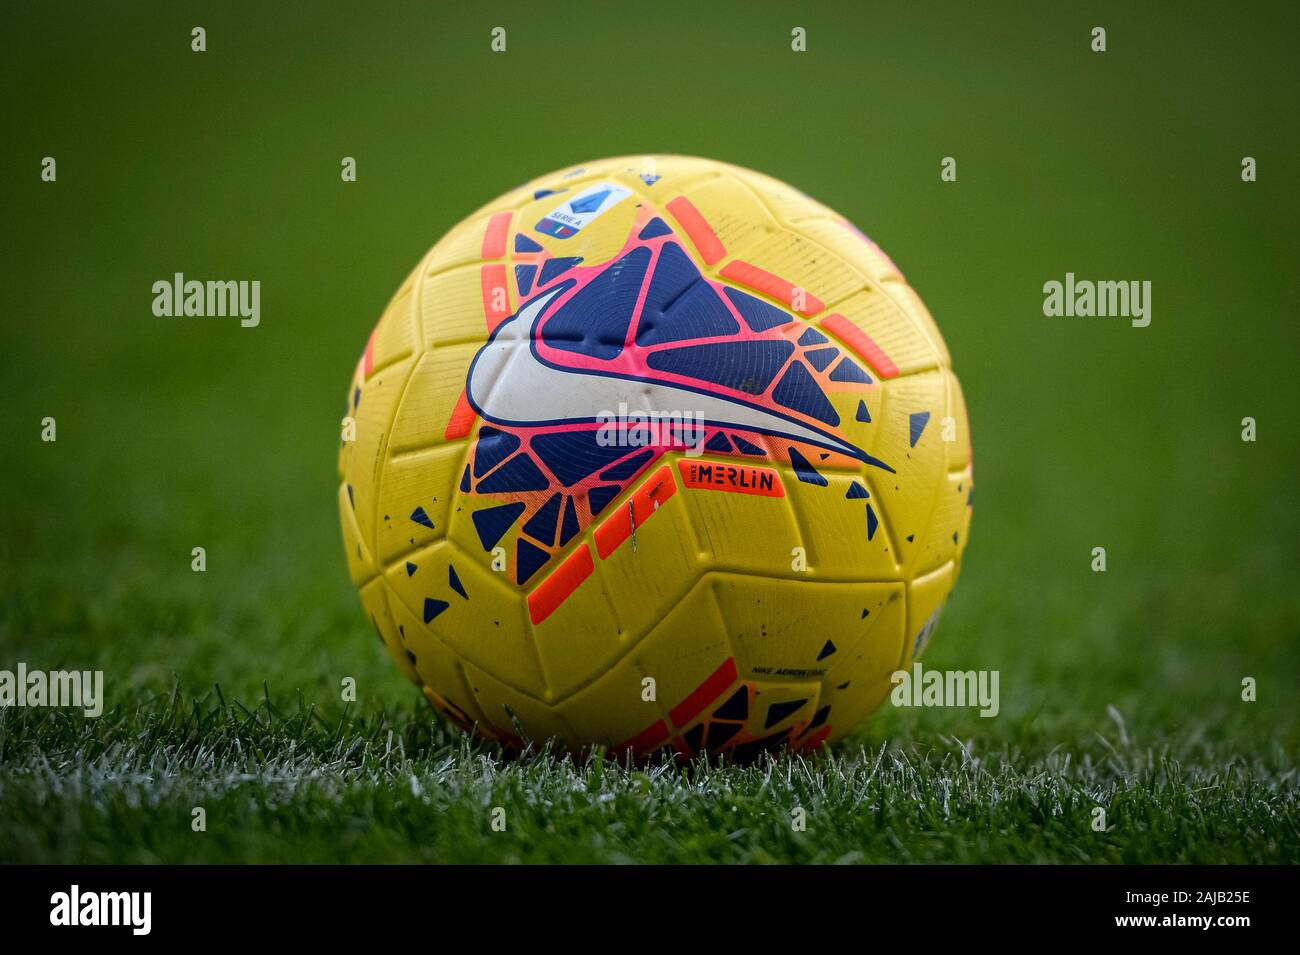 Turin, Italy - 08 December, 2019: Official Seria A match ball Nike Merlin  Hi-Vis is pictured during the Serie A football match between Torino FC and  ACF Fiorentina. Torino FC won 2-1